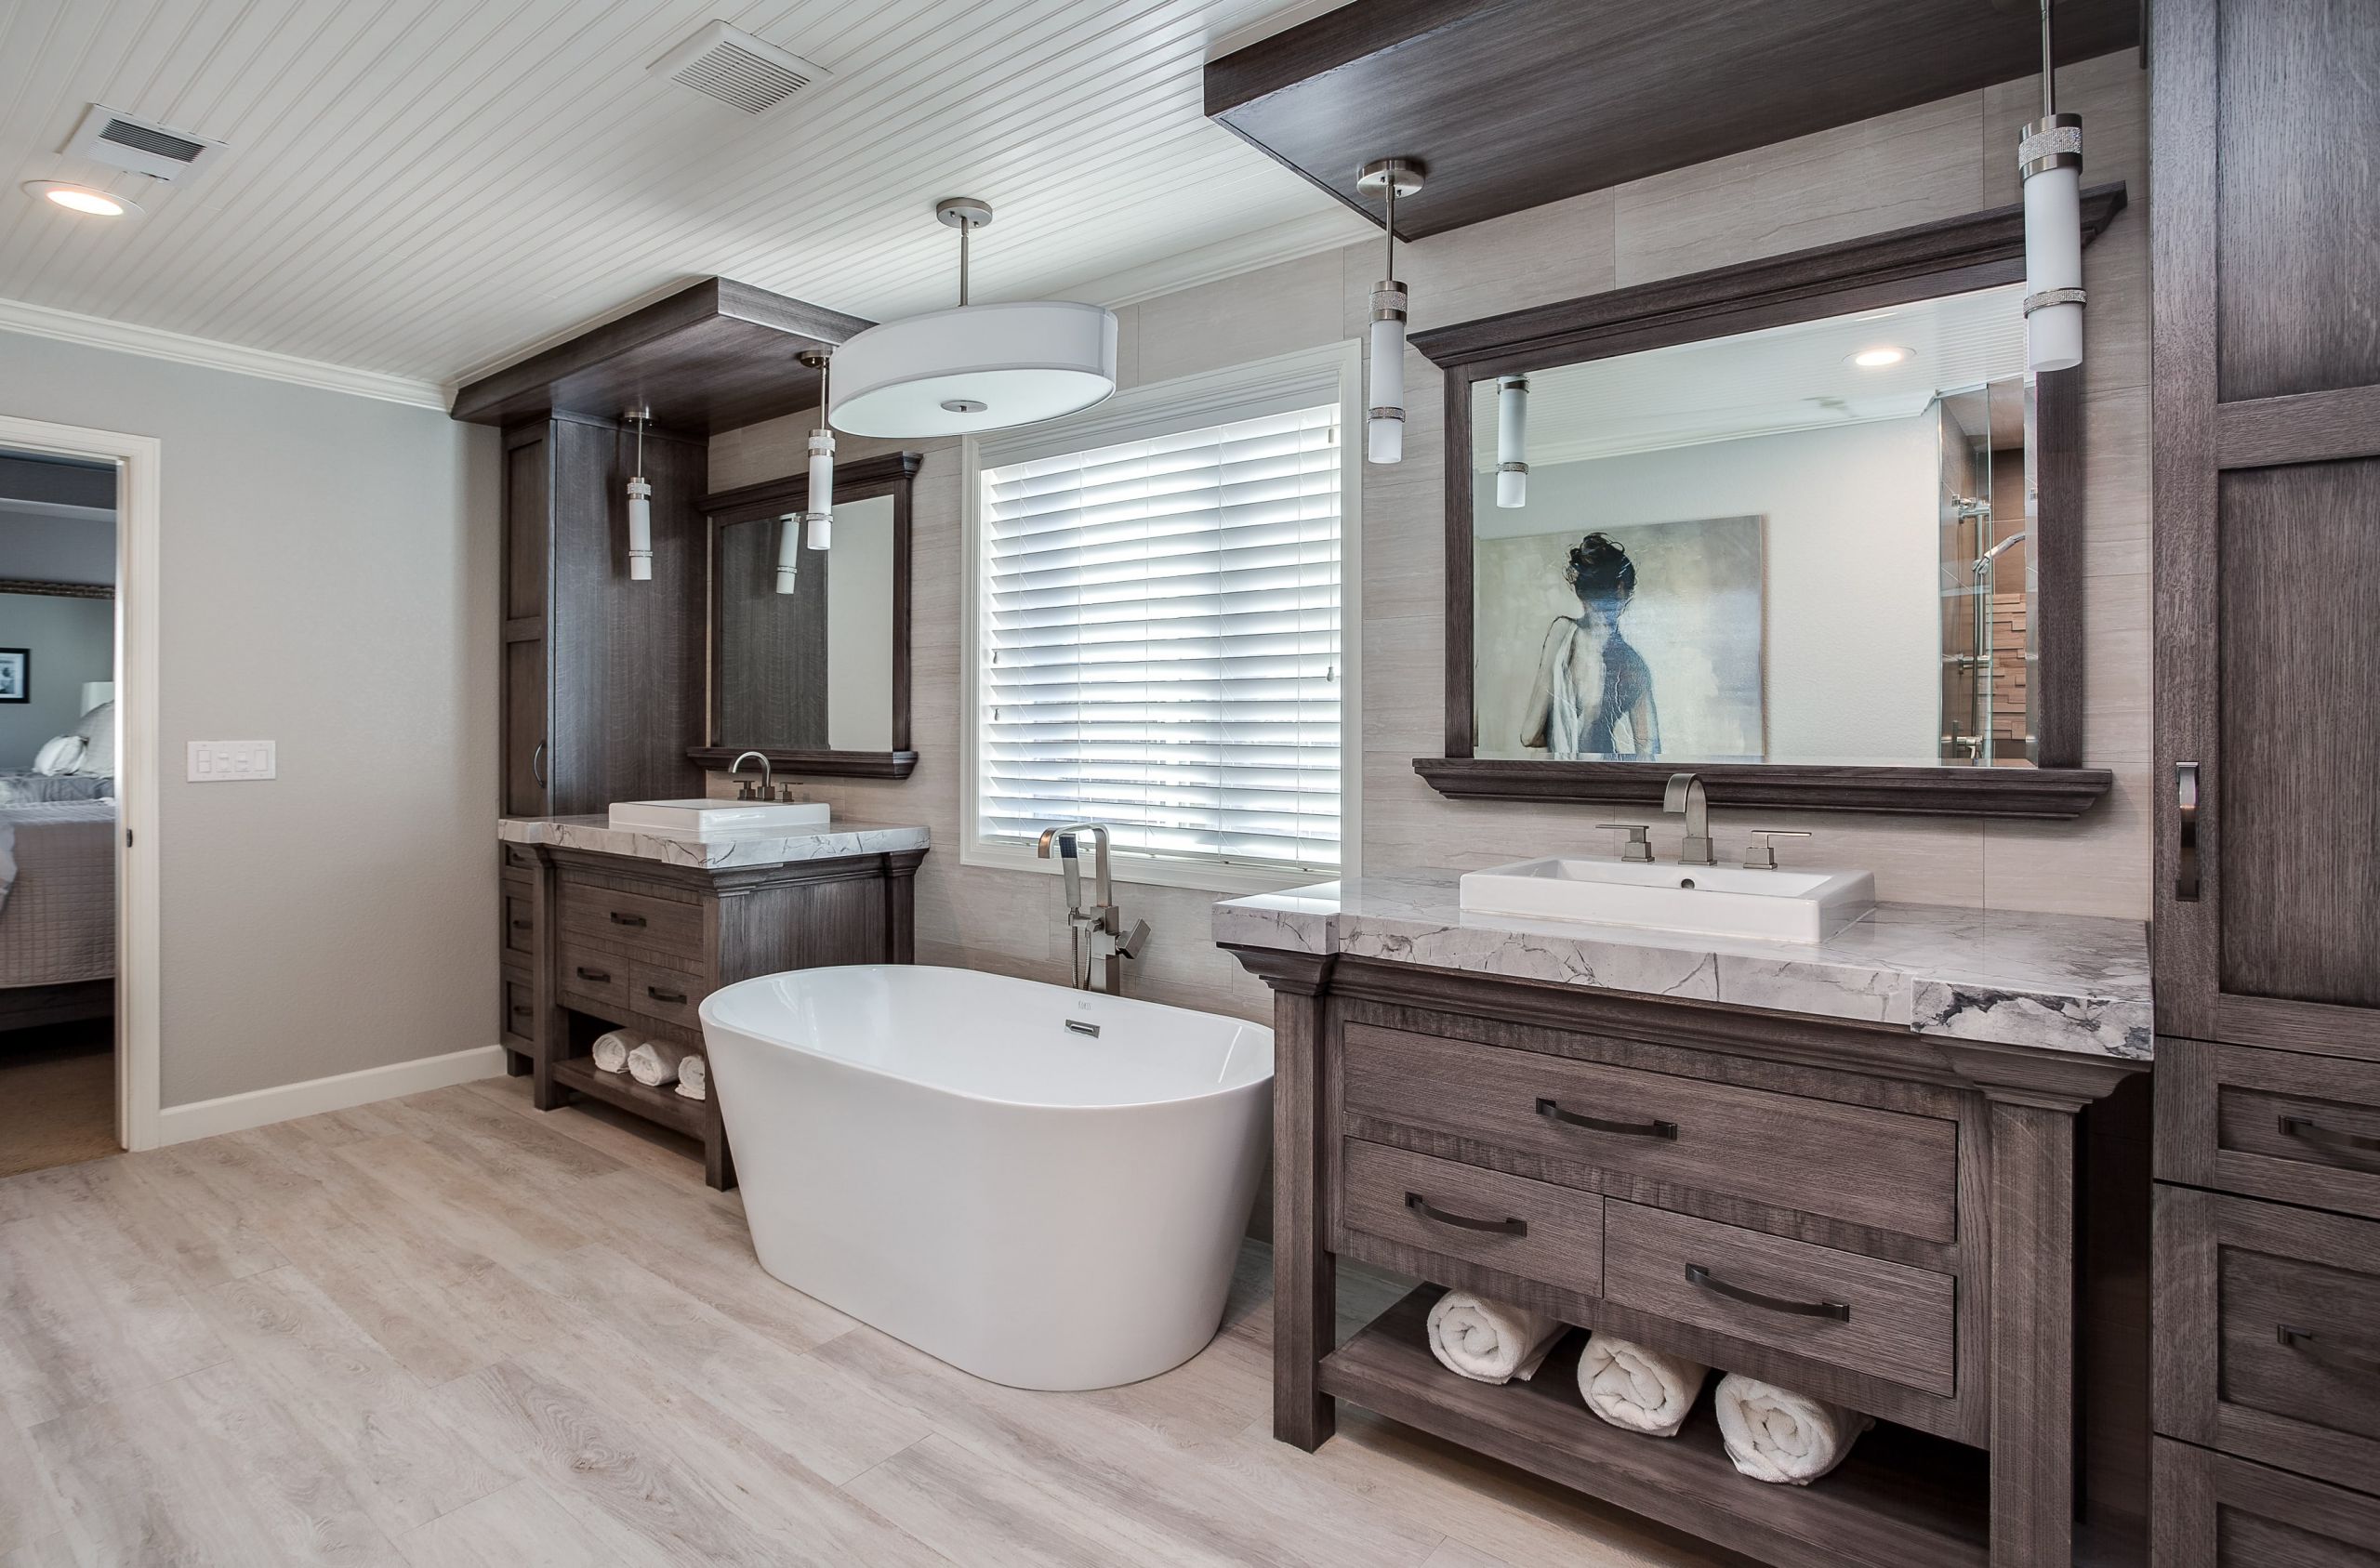 Master Bathroom Pictures
 Your Master Bathroom Retreat Make it Your Own JM